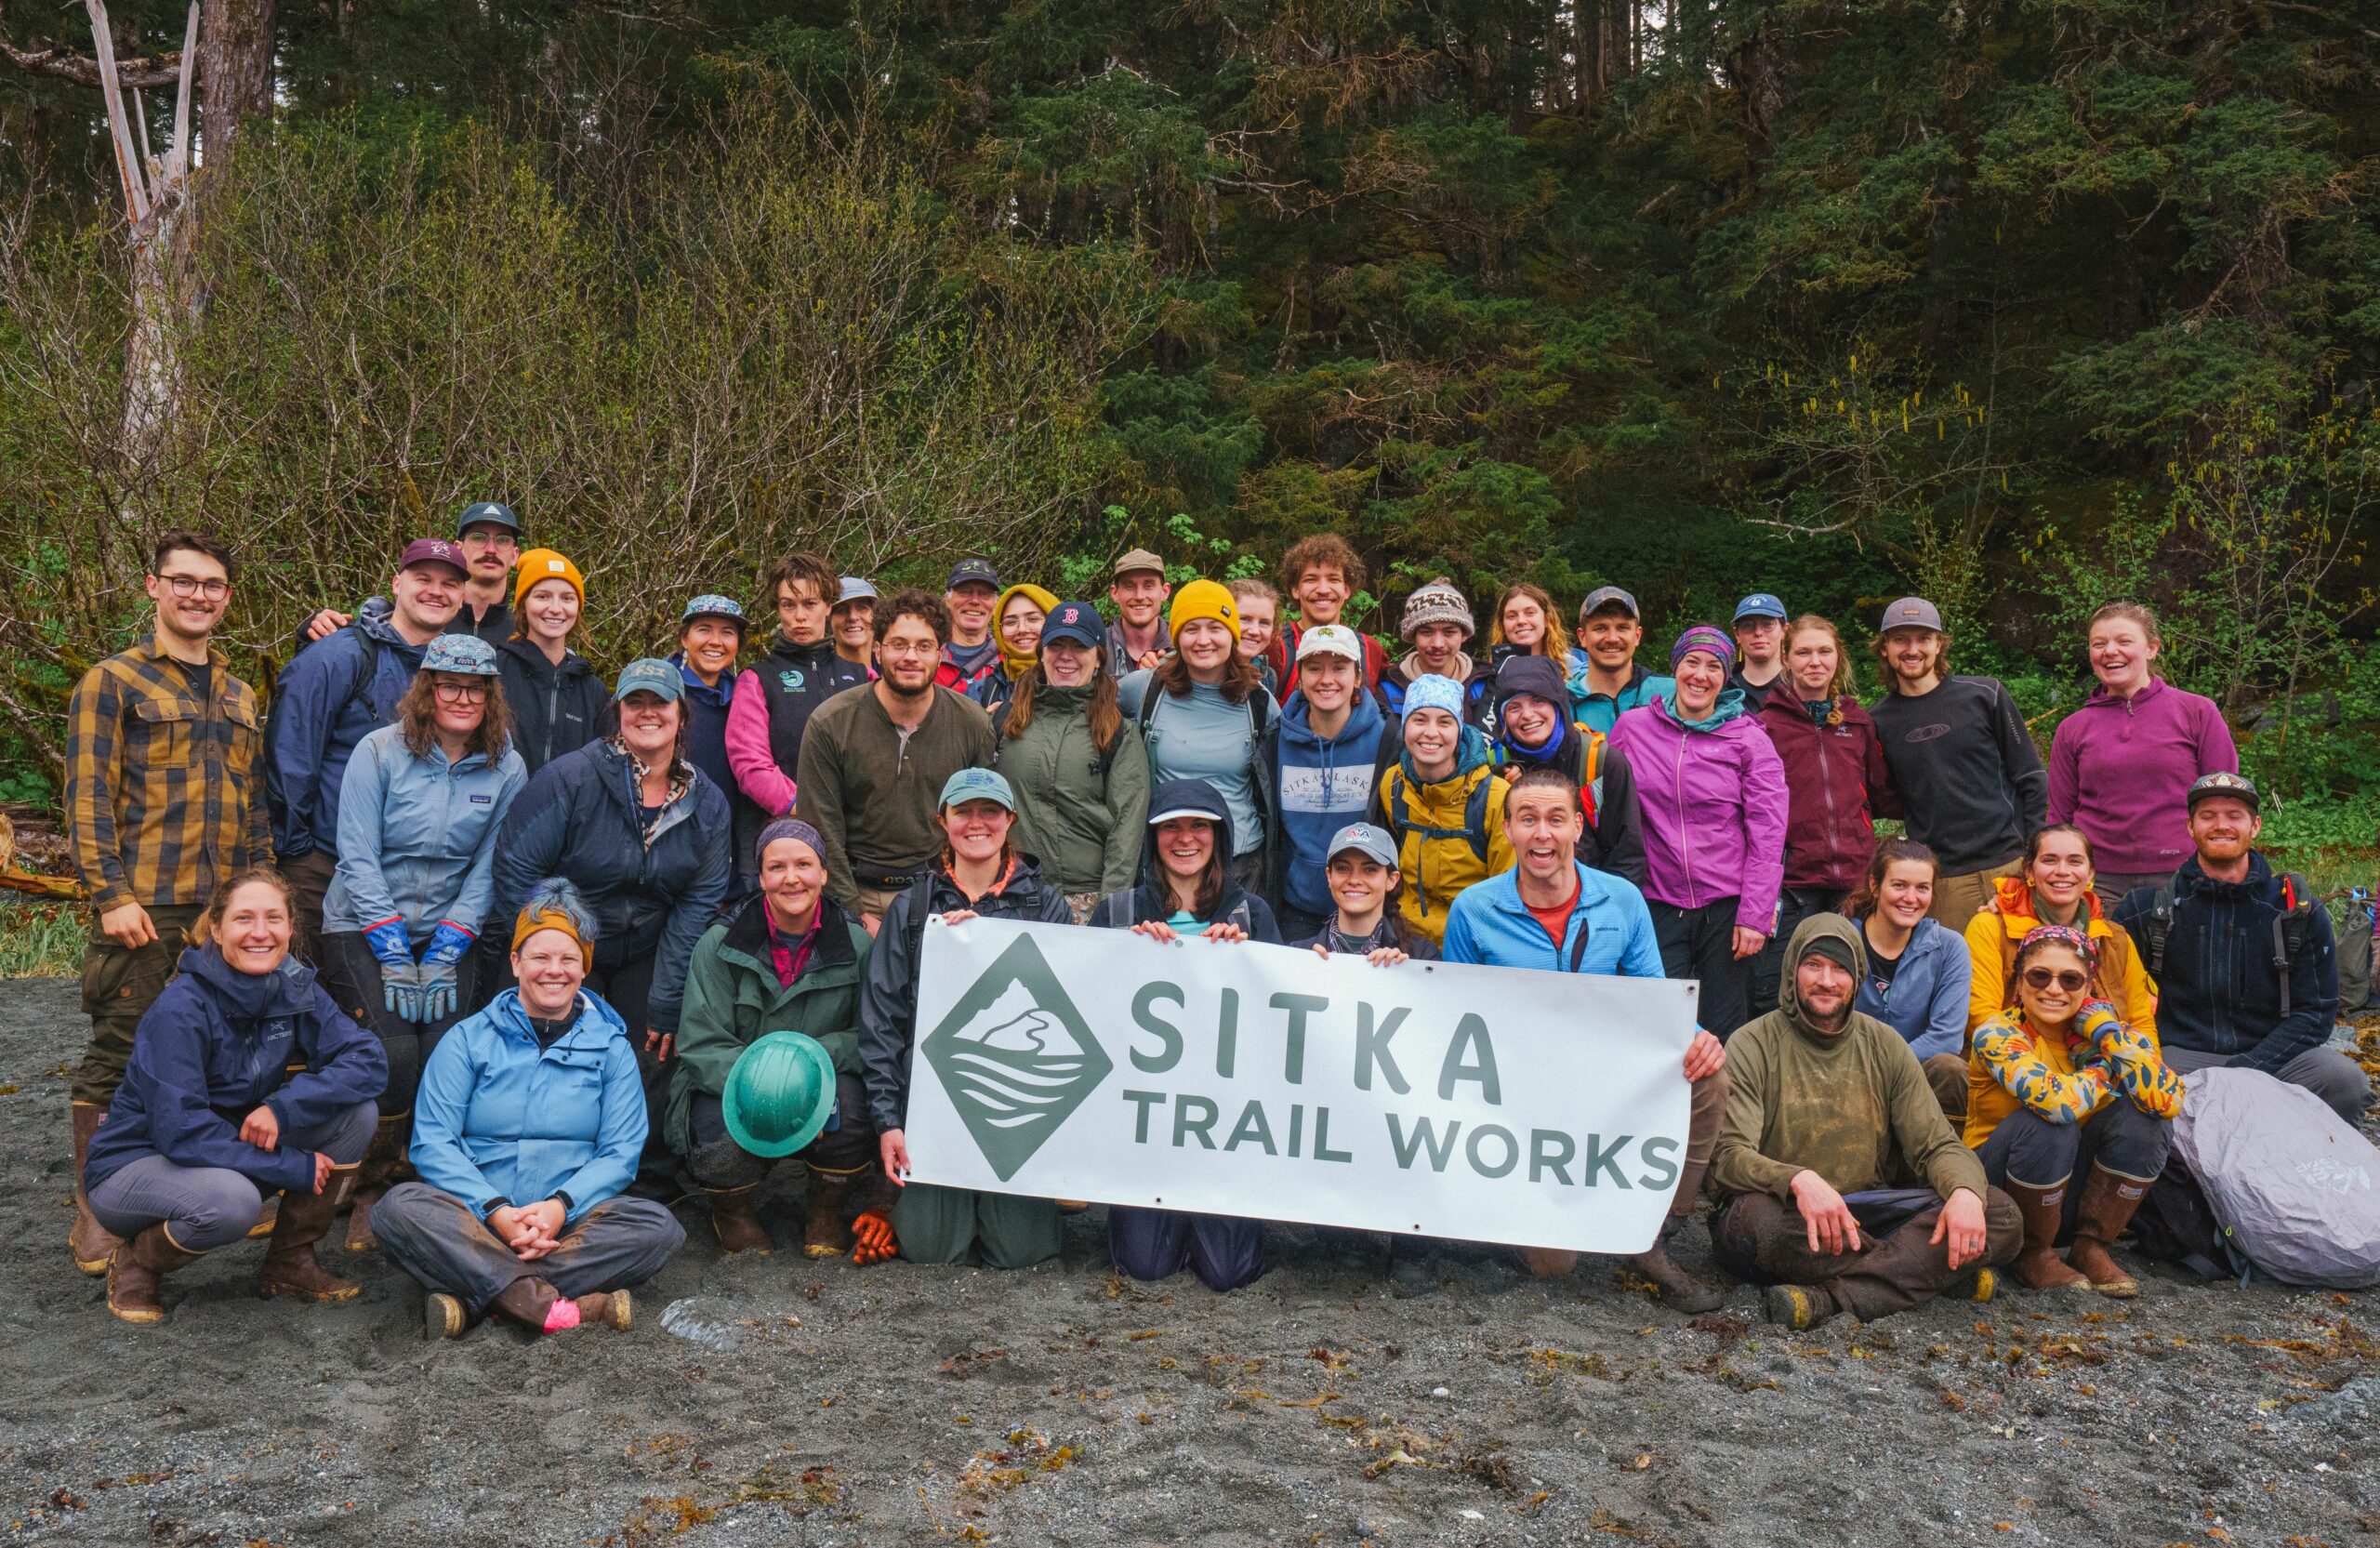 About 40 Sitka Trail Works volunteers, holding up a Sitka Trail Works sign.